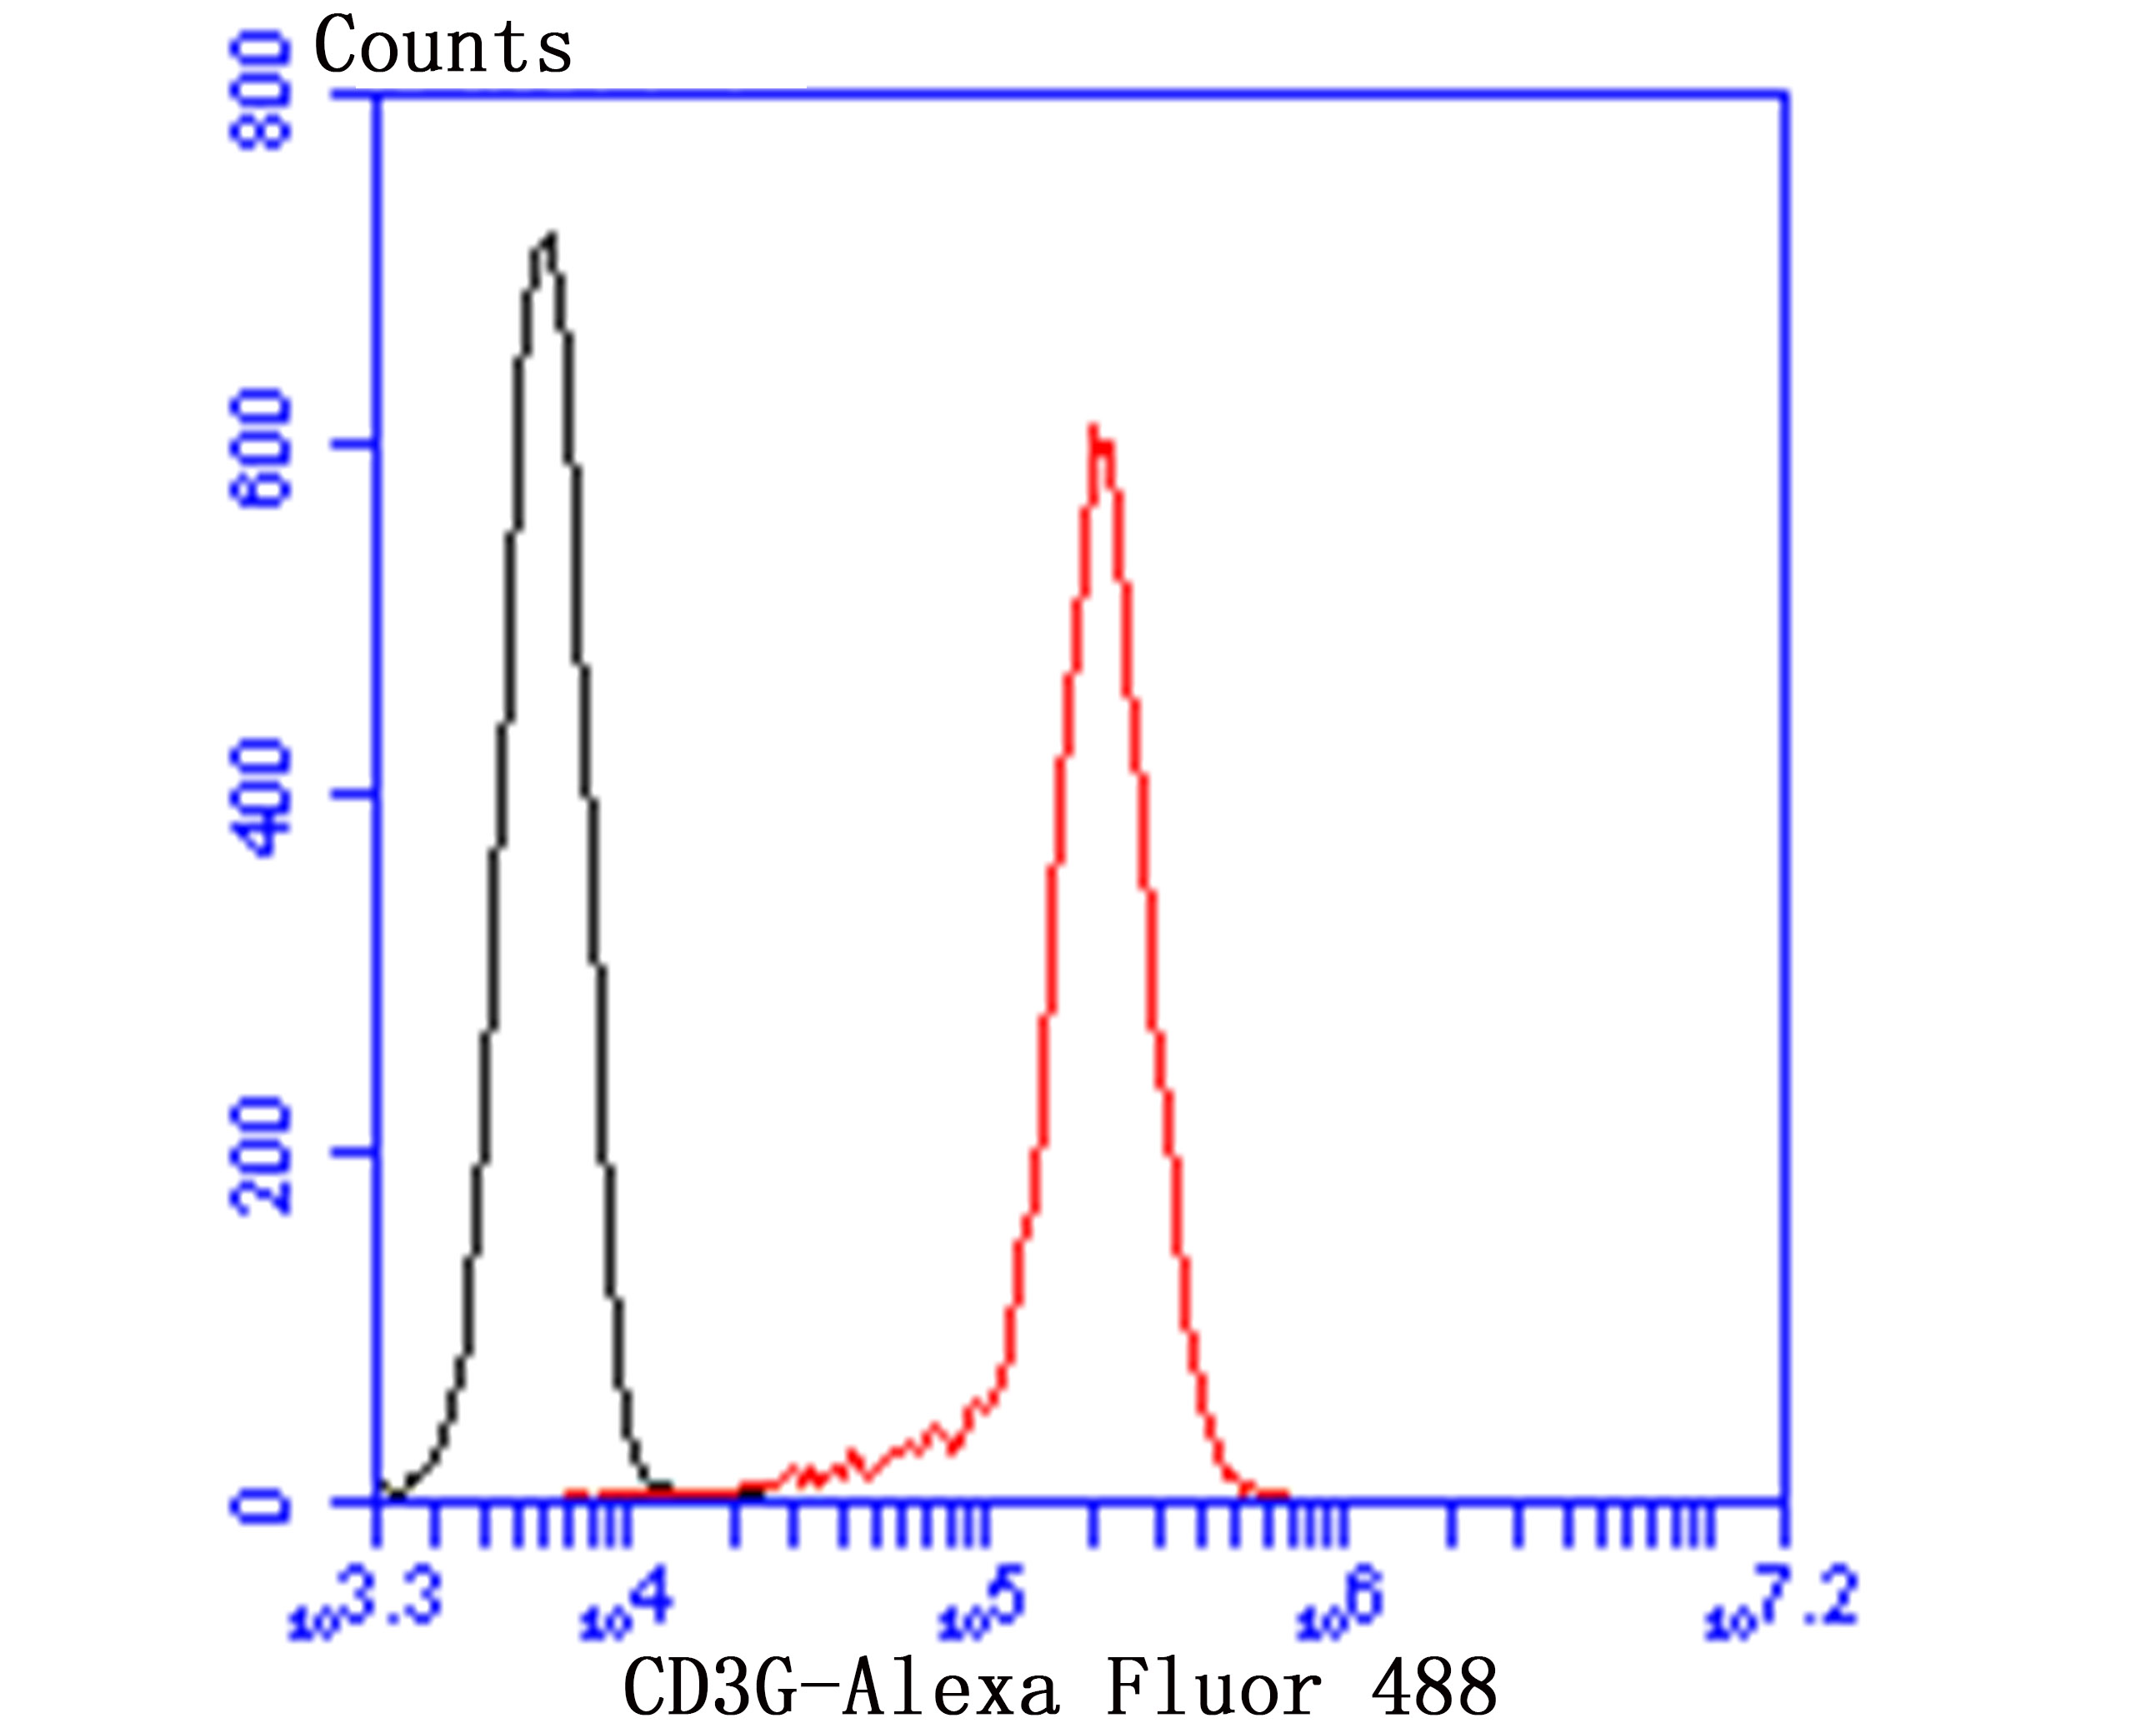 Flow cytometric analysis of CD3G was done on Jurkat cells. The cells were fixed, permeabilized and stained with the primary antibody (ET7107-55, 1/50) (red). After incubation of the primary antibody at room temperature for an hour, the cells were stained with a Alexa Fluor 488-conjugated Goat anti-Rabbit IgG Secondary antibody at 1/1,000 dilution for 30 minutes.Unlabelled sample was used as a control (cells without incubation with primary antibody; black).